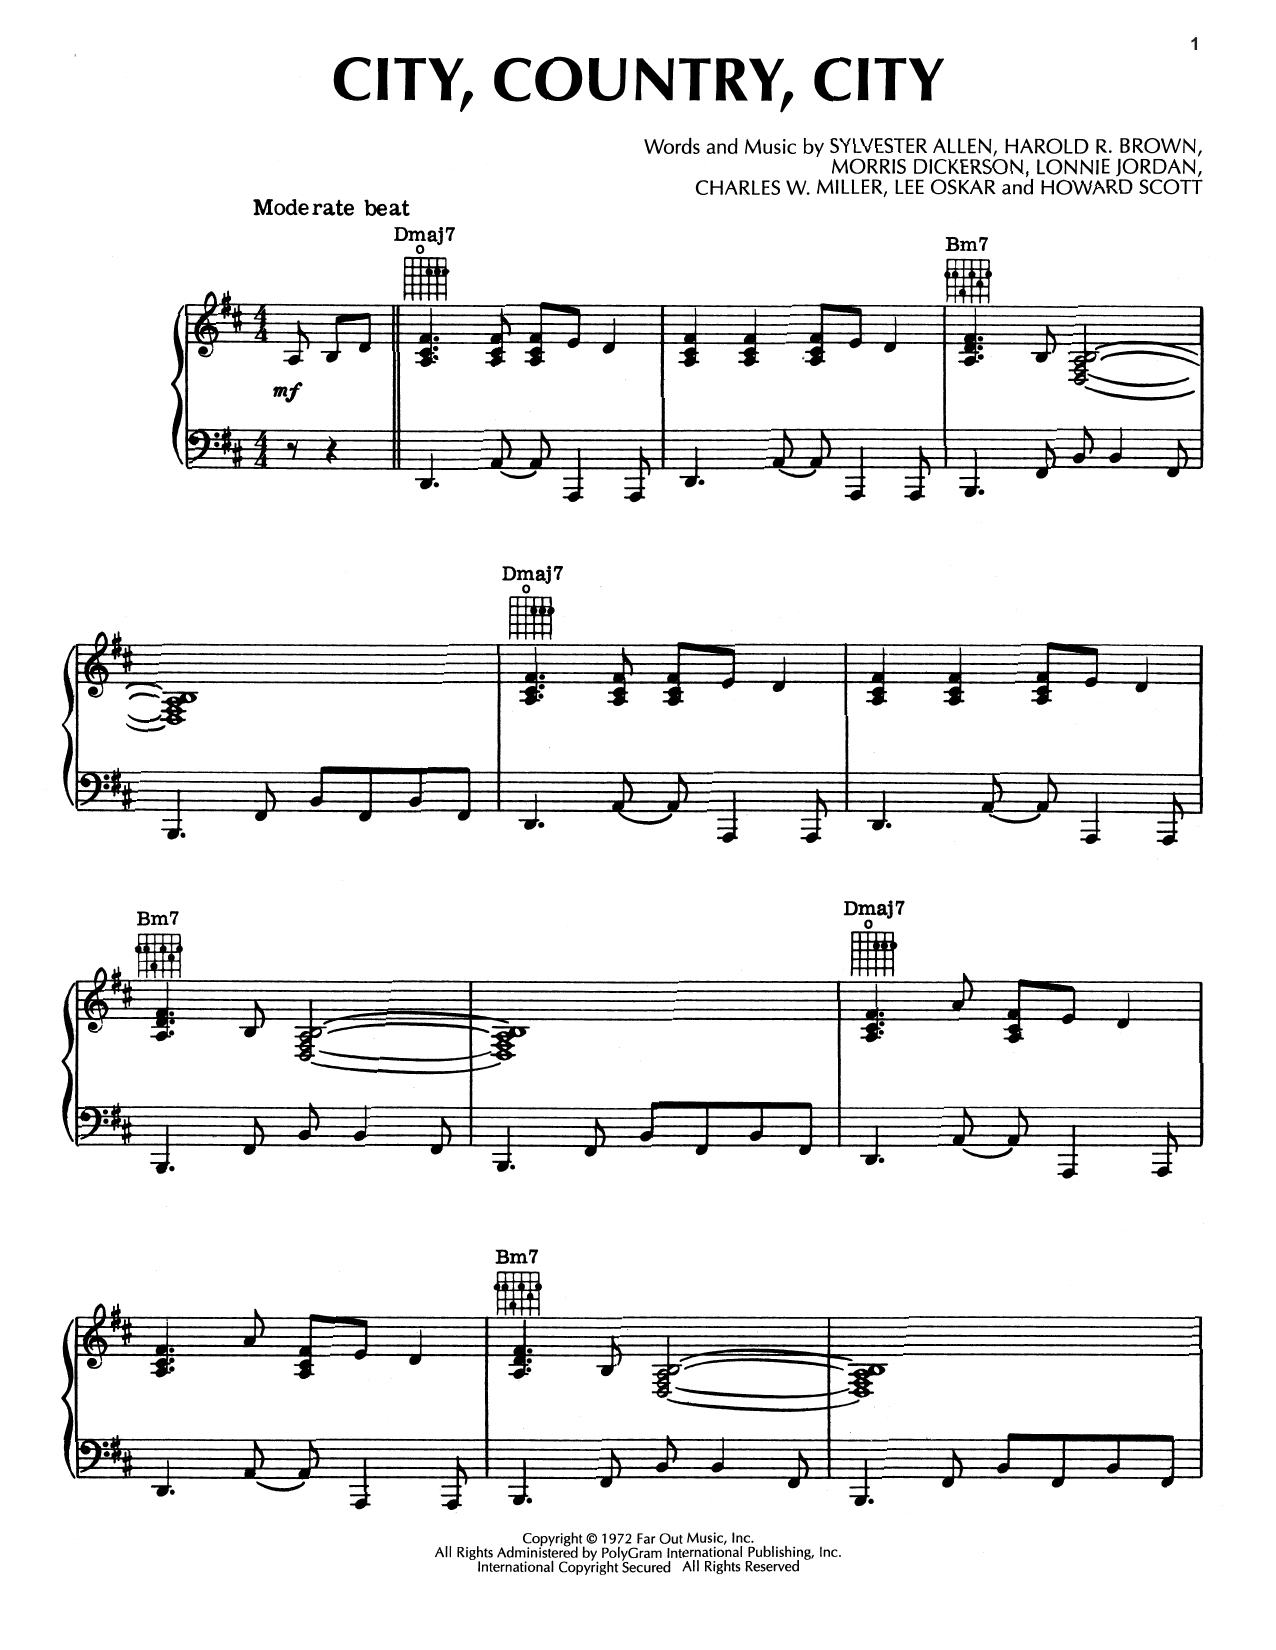 Download War City, Country, City Sheet Music